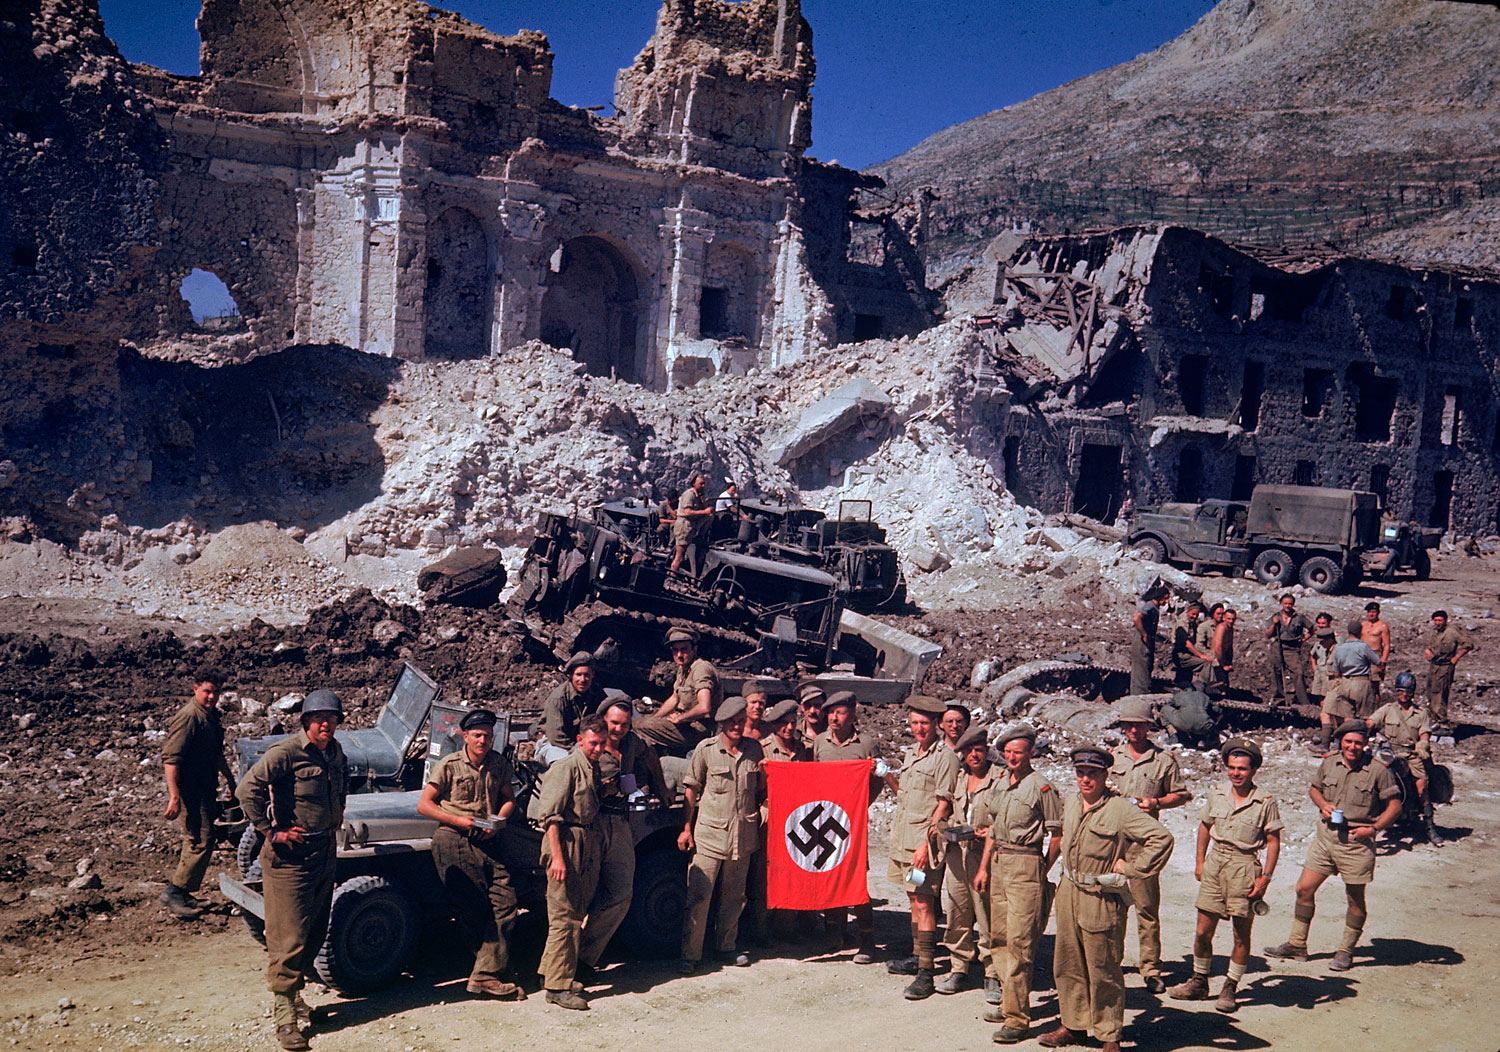 British and South African soldiers hold up a Nazi trophy flag while combat engineers on bulldozers clear a path through the debris of a bombed-out city, Italian Campaign, World War II.